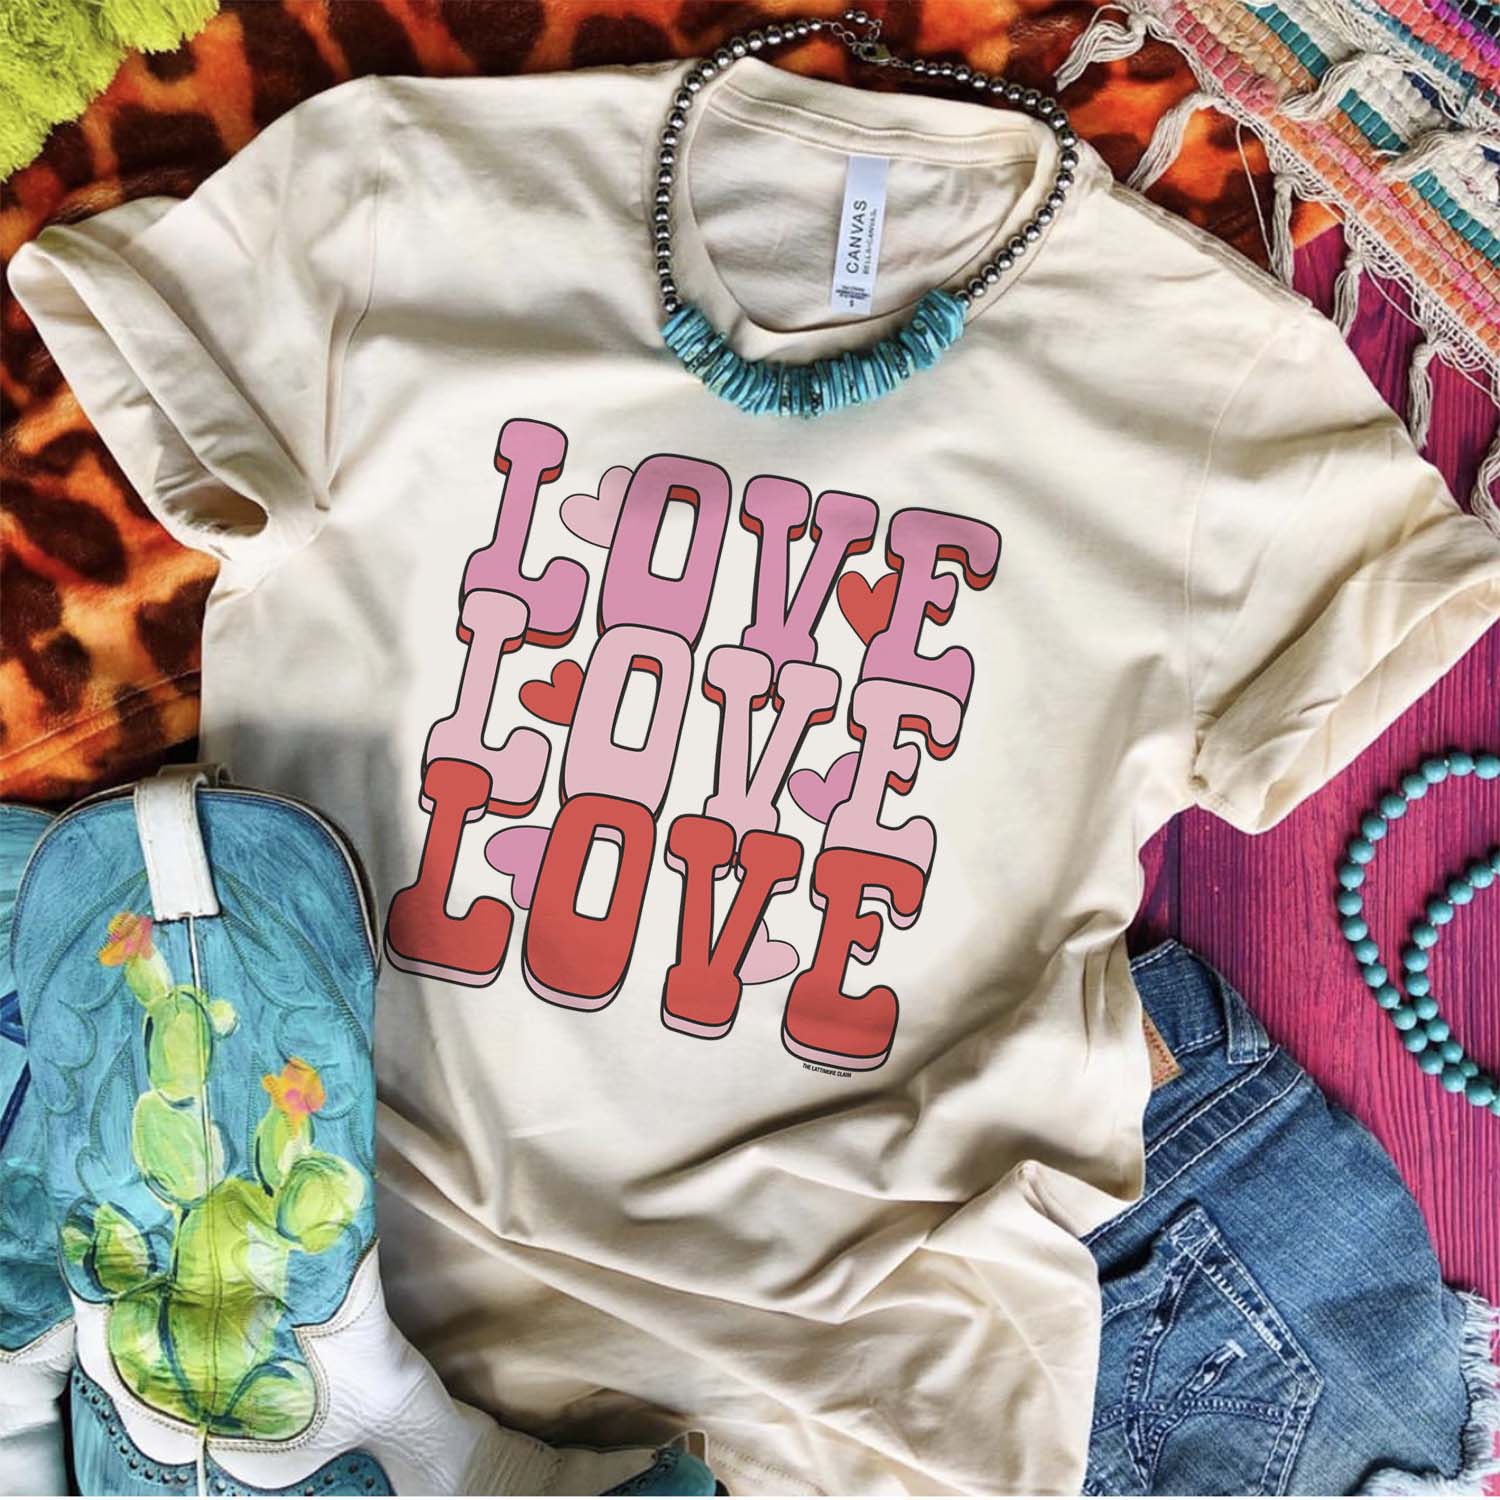 This cream tee is shown as a flatlay on a multi-colored background along with turquoise + cactus cowboy boots, denim shorts, and a turquoise and silver necklace. The graphic has the words "LOVE LOVE LOVE" in an ombre color pattern of hot pink, light pink, and red in all capital bubble font. There are also hearts randomly in between letters. This tee is also shown here with rolled sleeves. 